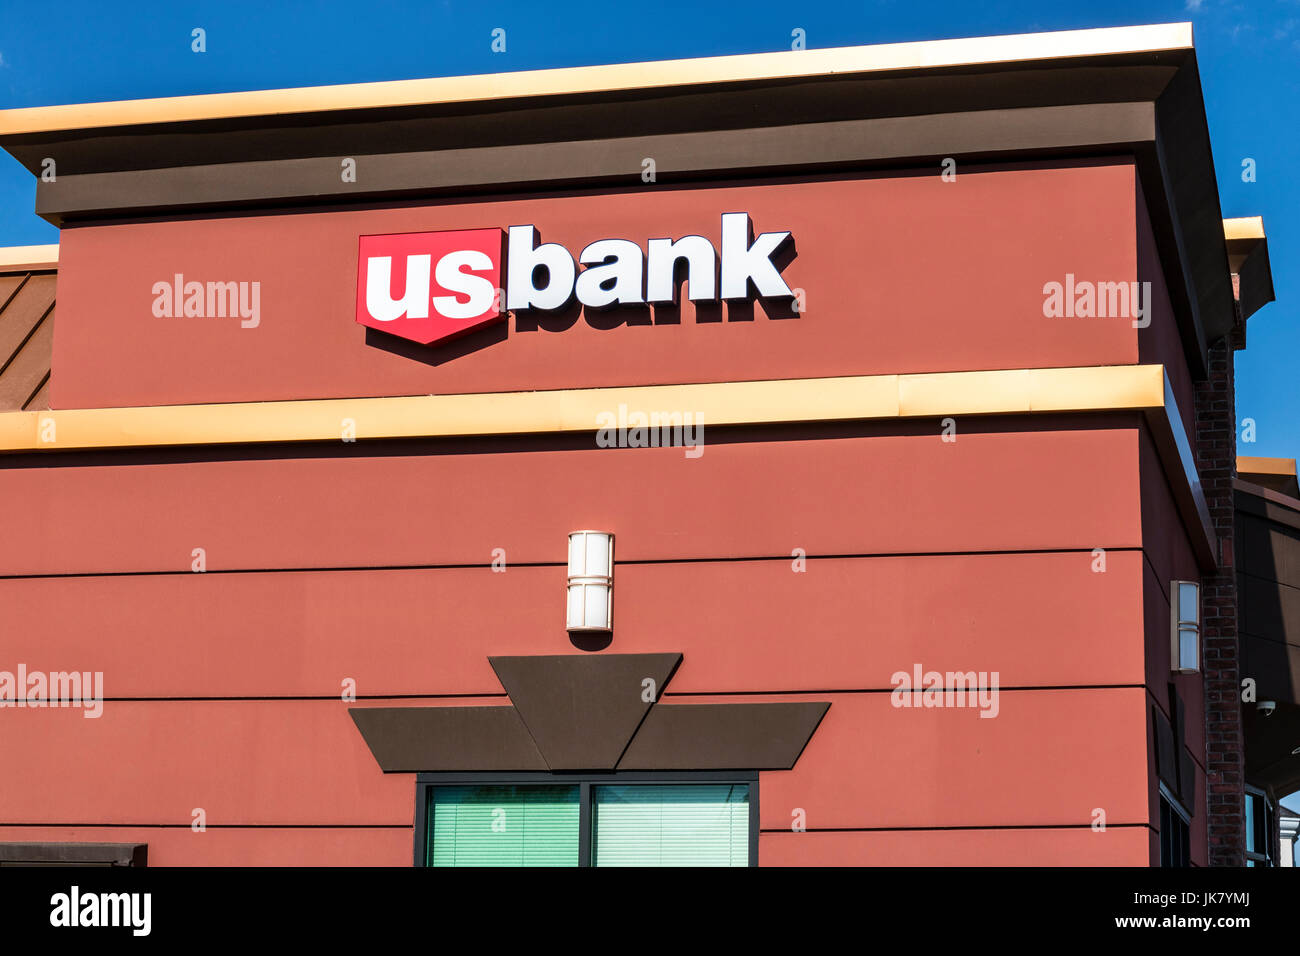 Las Vegas - Circa July 2017: U.S. Bank and Loan Branch. US Bank is ranked the 5th largest bank in the United States I Stock Photo